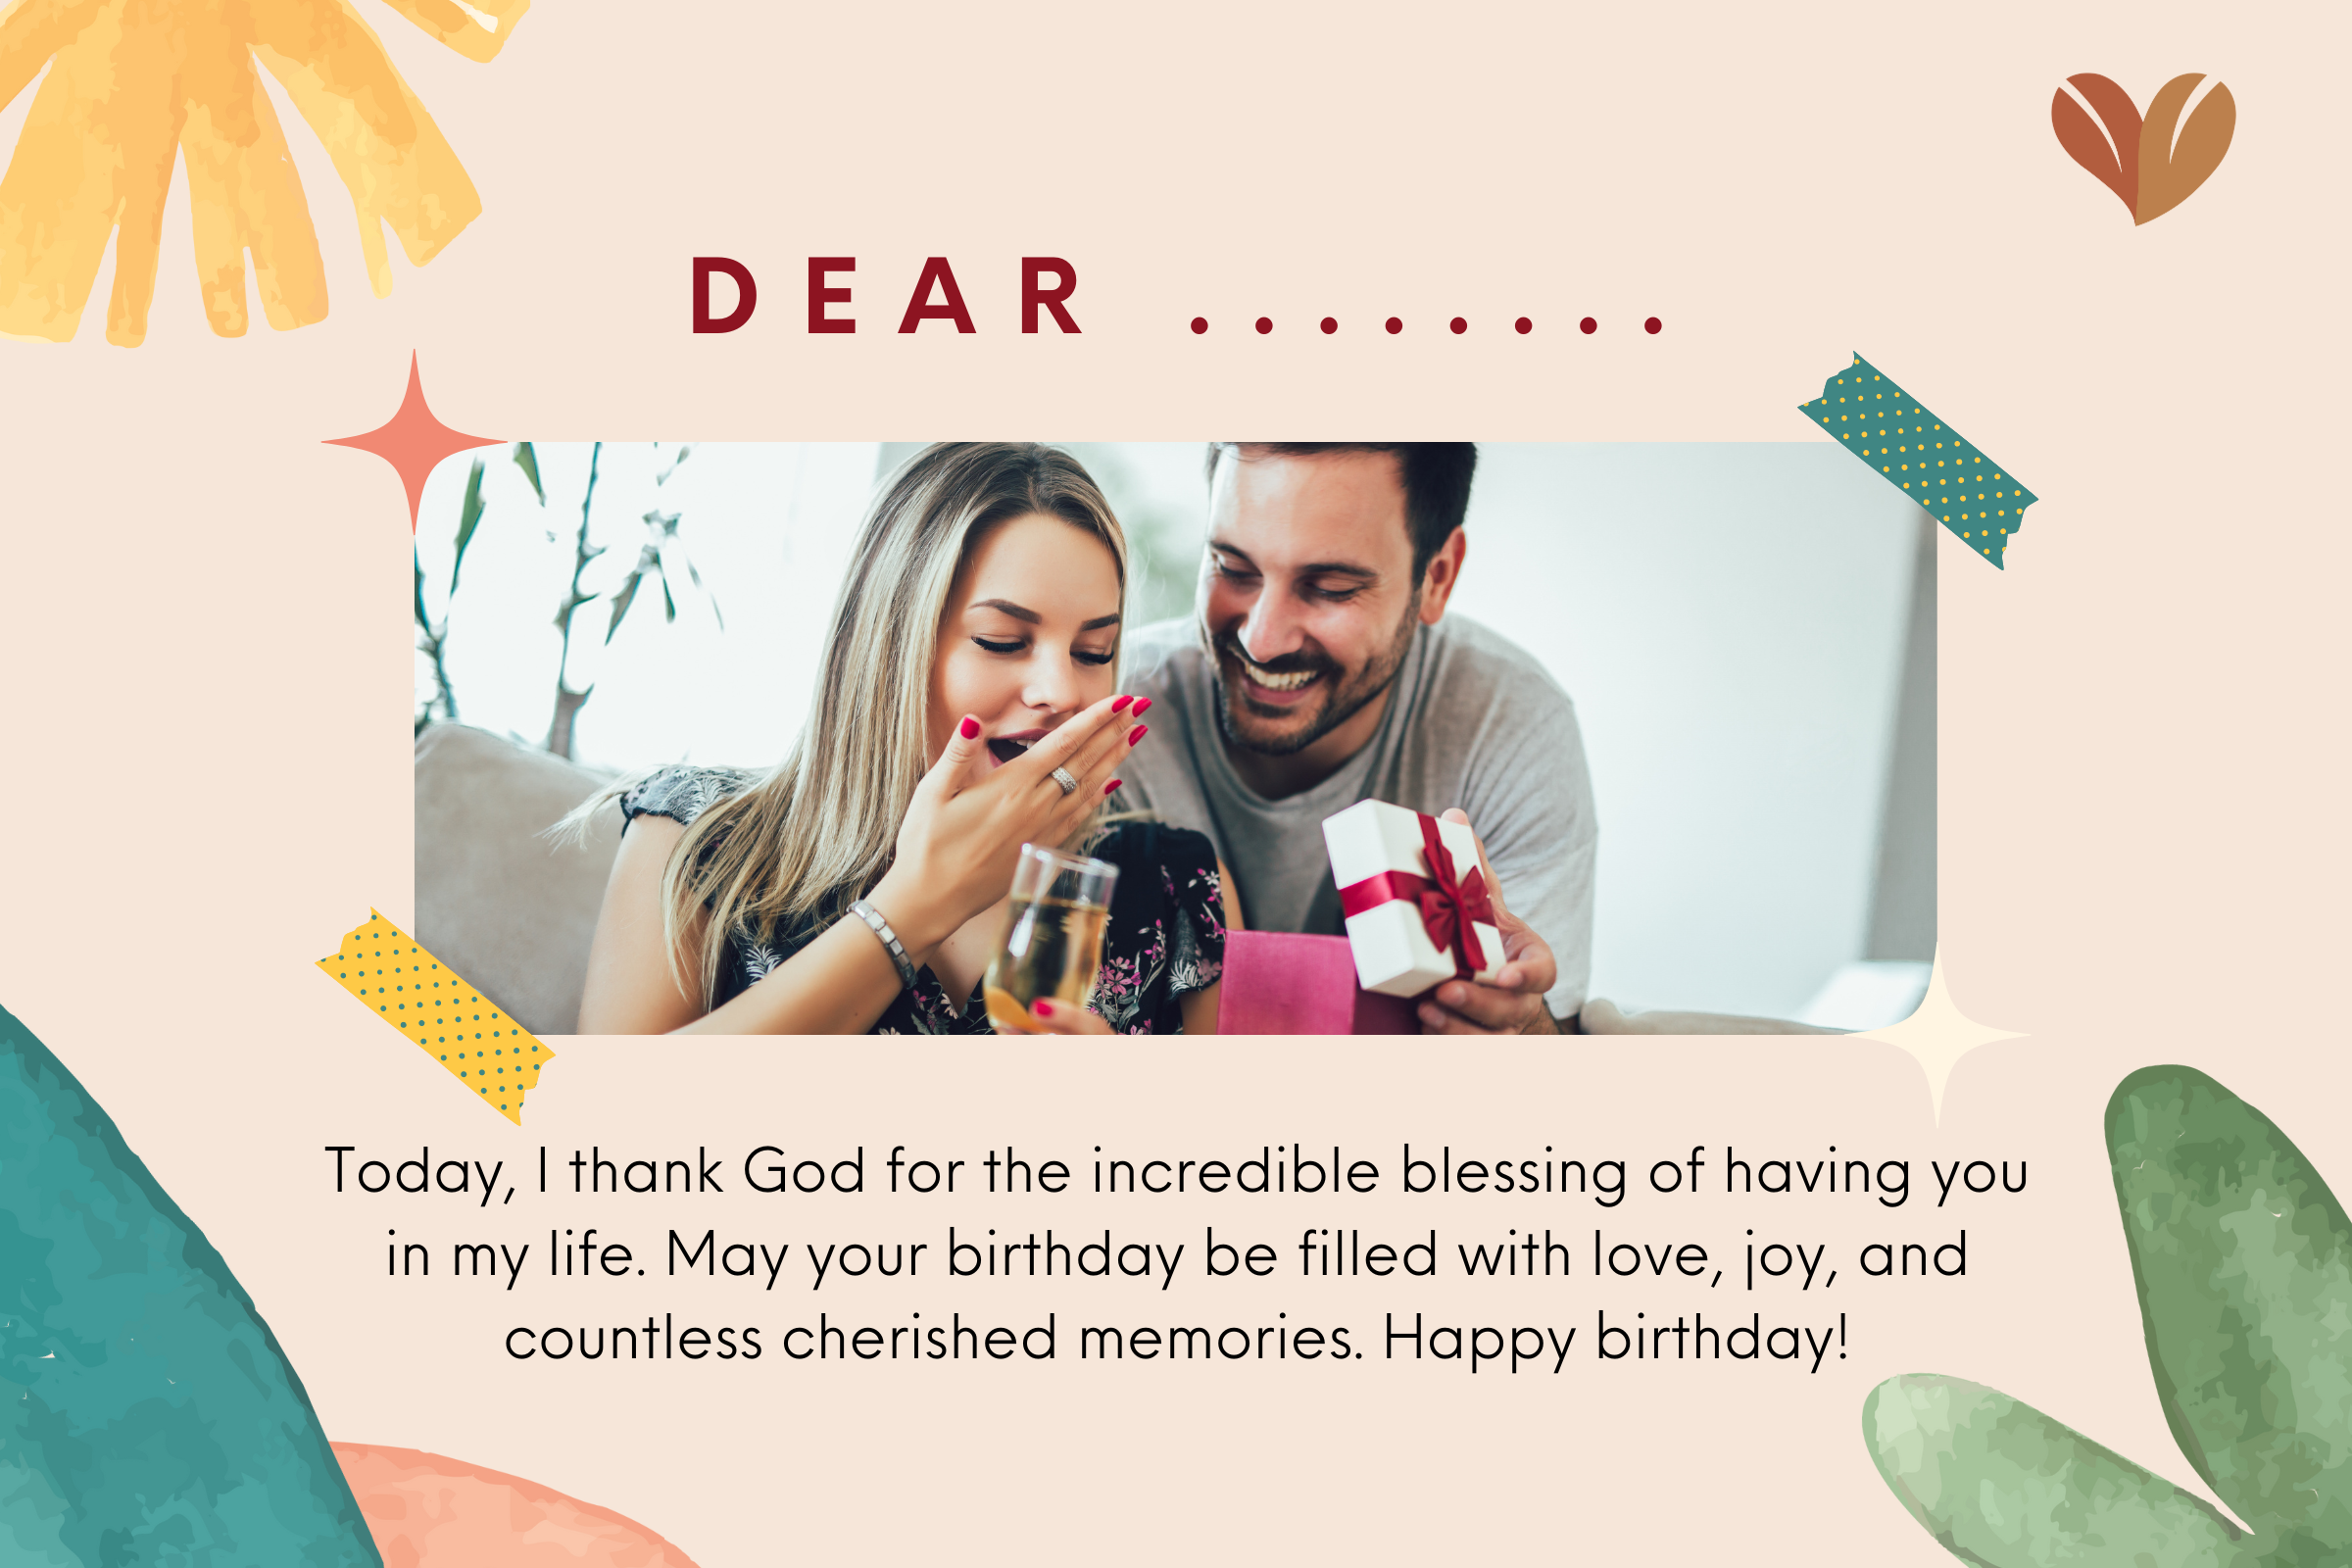 100+ Religious and Godly Birthday Wishes, Messages and Quotes